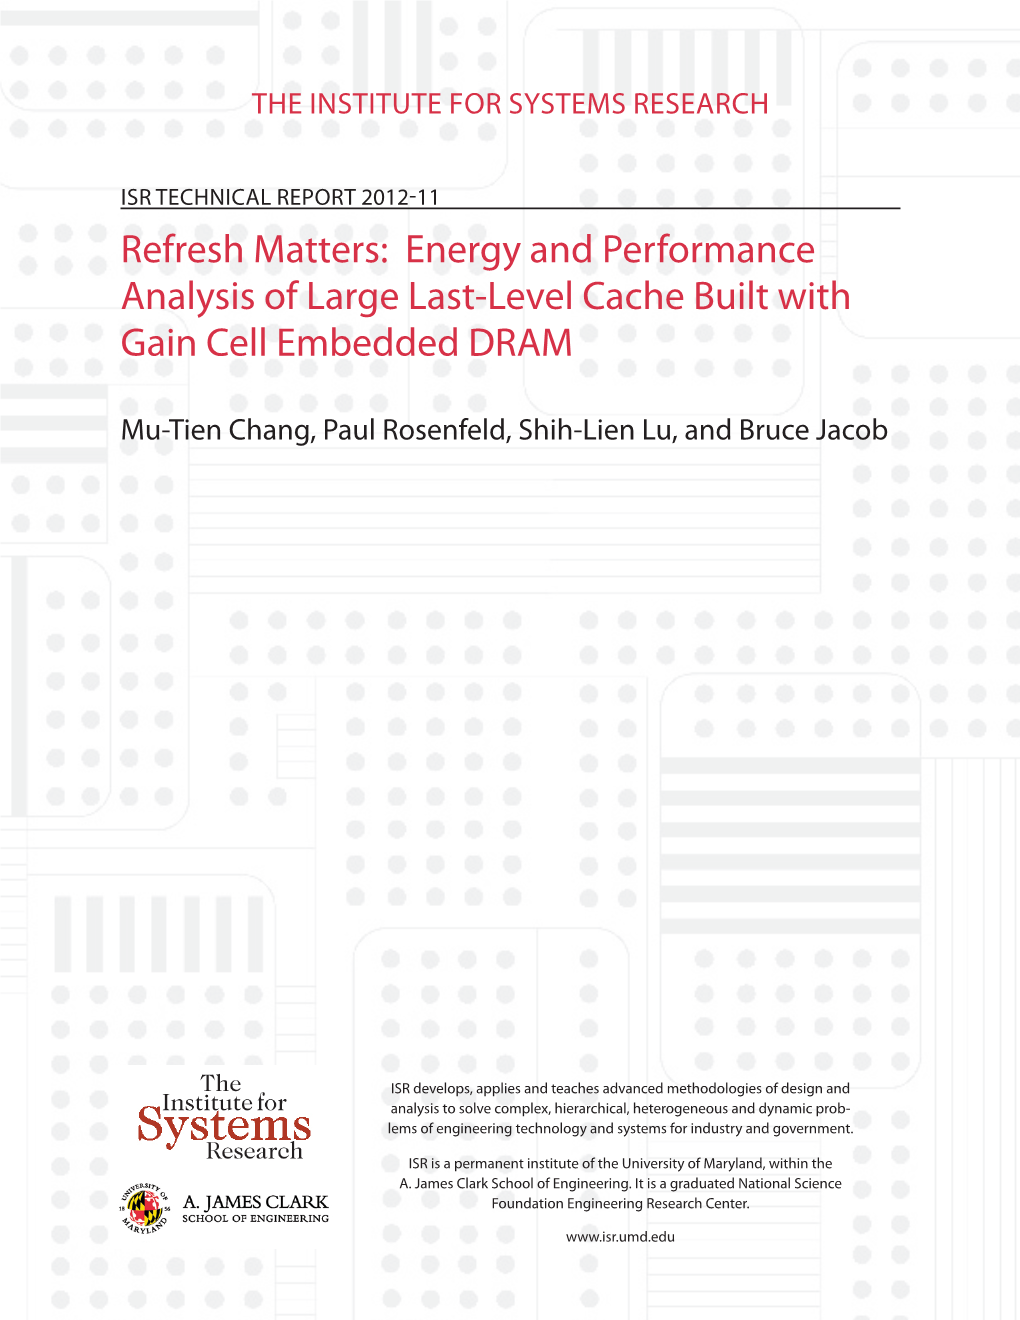 Energy and Performance Analysis of Large Last-Level Cache Built with Gain Cell Embedded DRAM